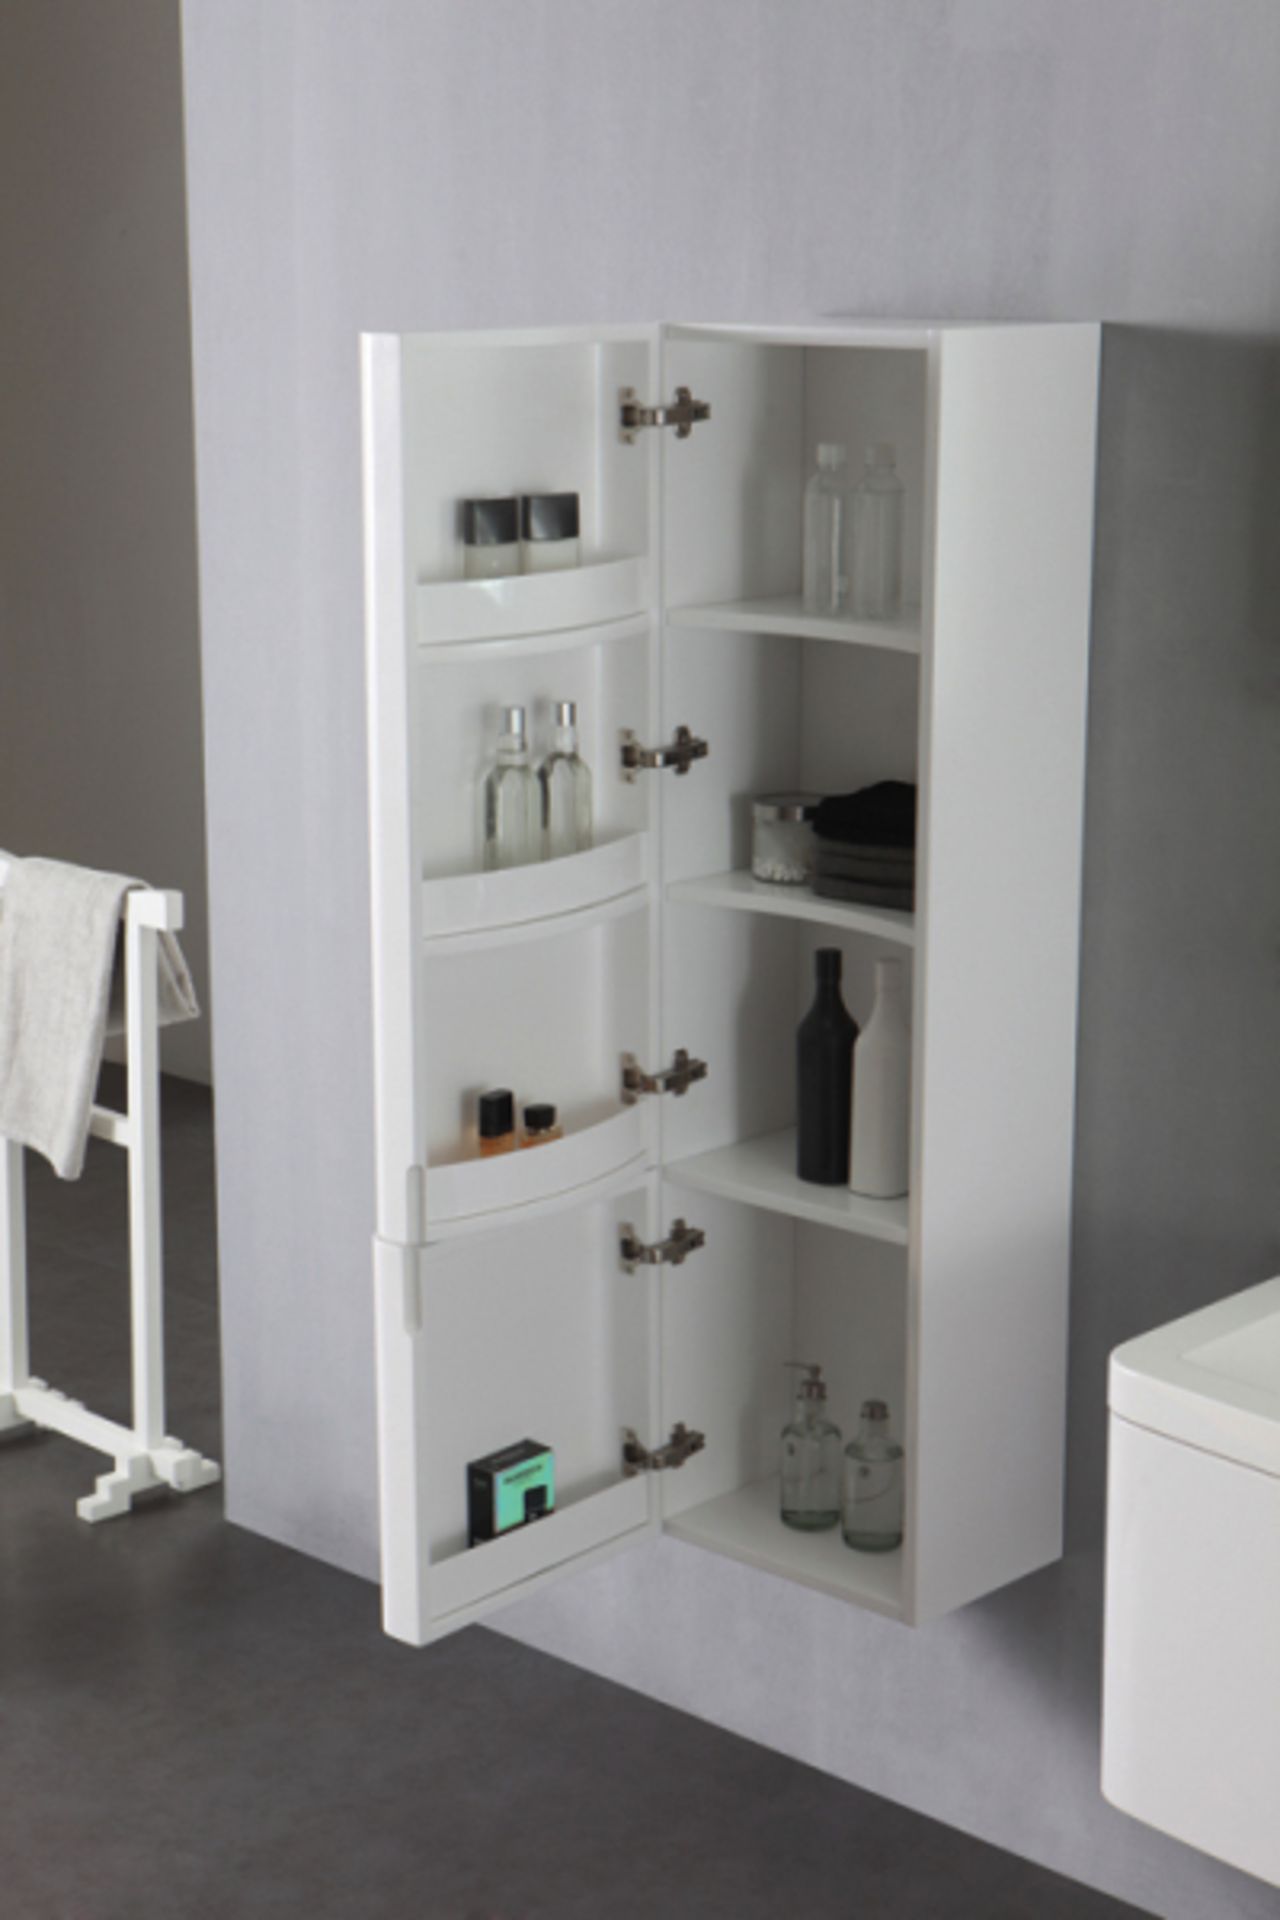 1 x White Gloss Storage Cabinet 120 - A-Grade - Ref:ASC42-120 - CL170 - Location: Nottingham NG2 - - Image 4 of 4